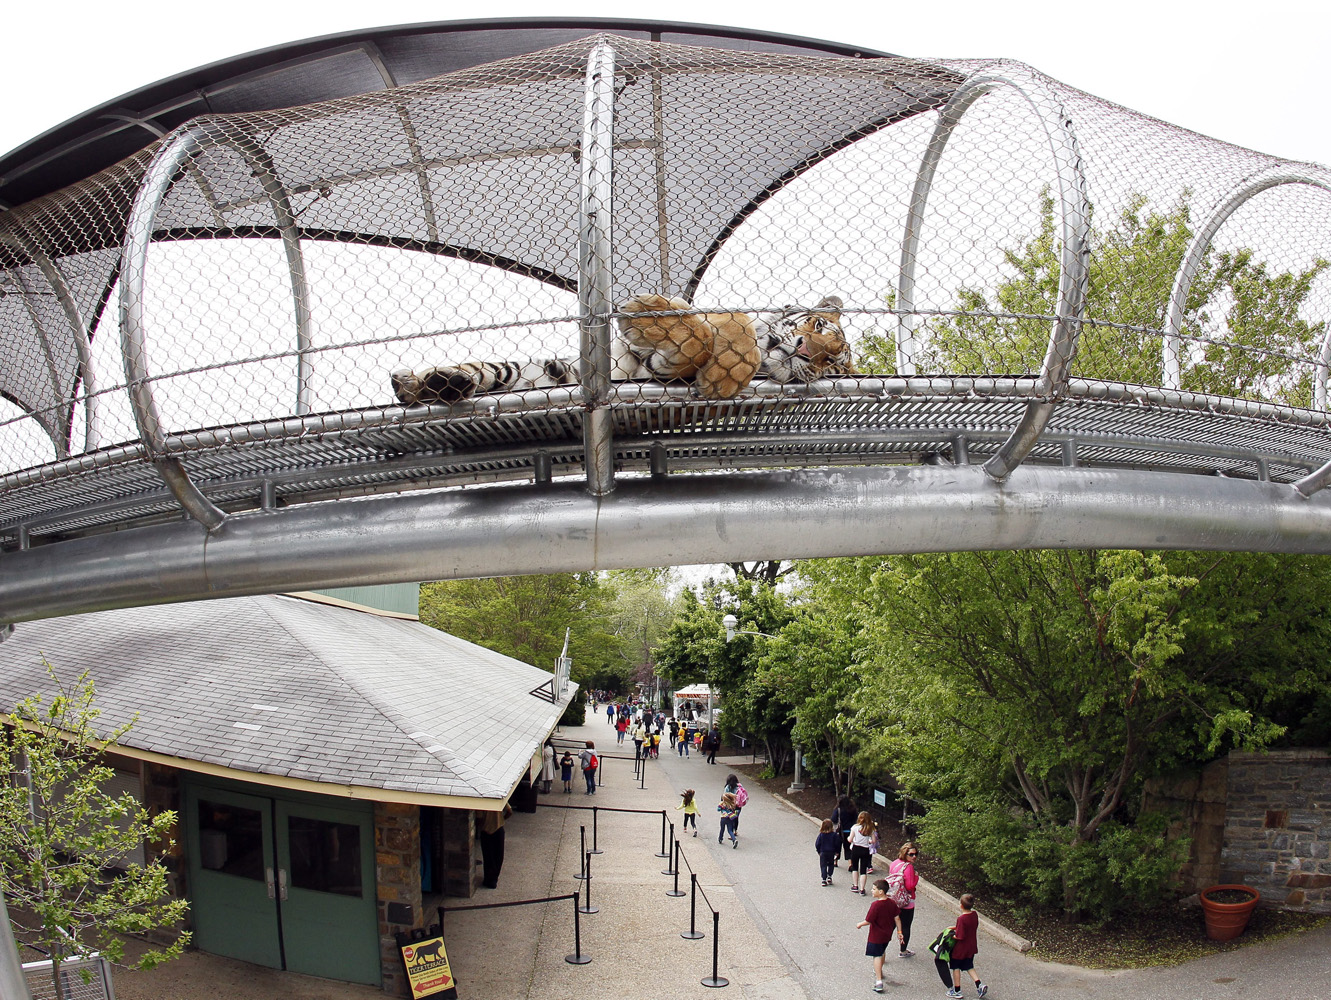 An Amur Tiger lies down to relax in the Big Cat Crossing, a mesh-engineered passageway that crosses over the main visitor path inside the Philadelphia Zoo in Philadelphia, on May 14, 2014.